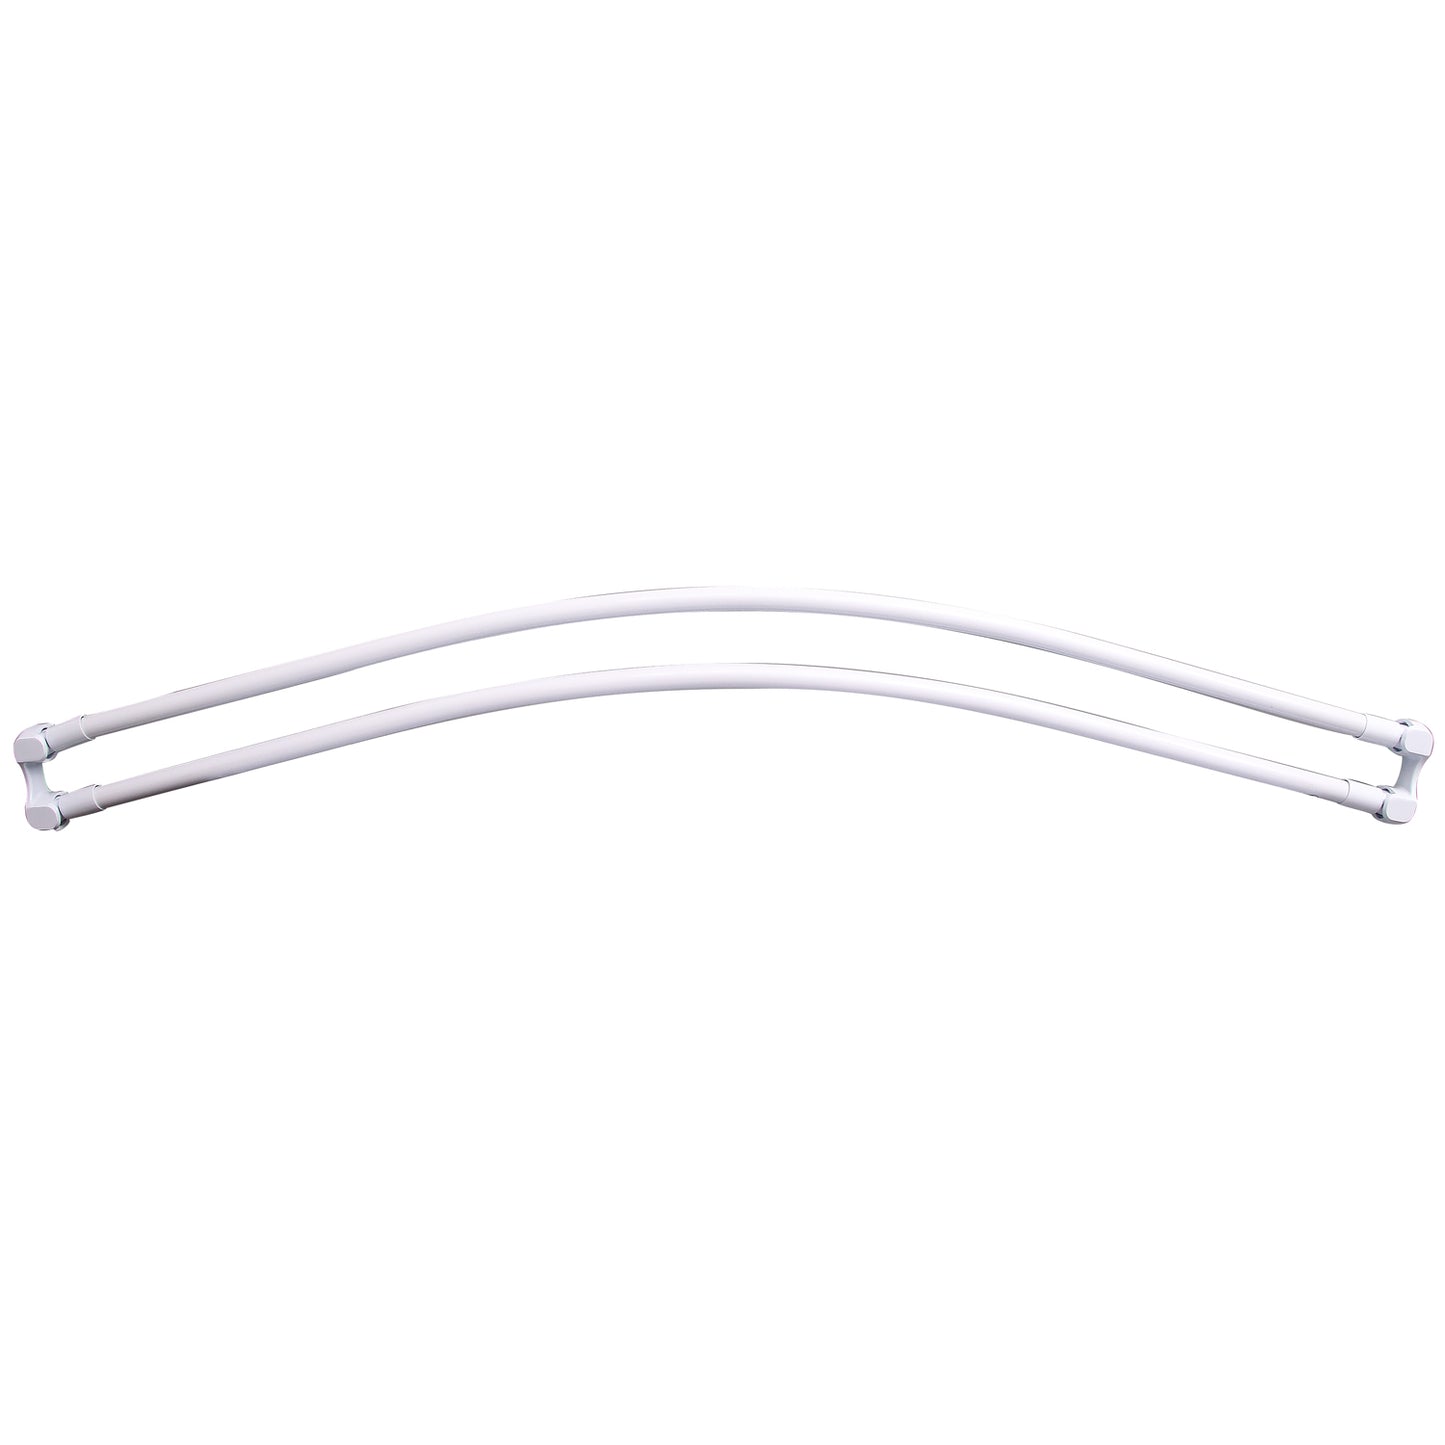 72" Double Curved Shower Curtain Rod in White